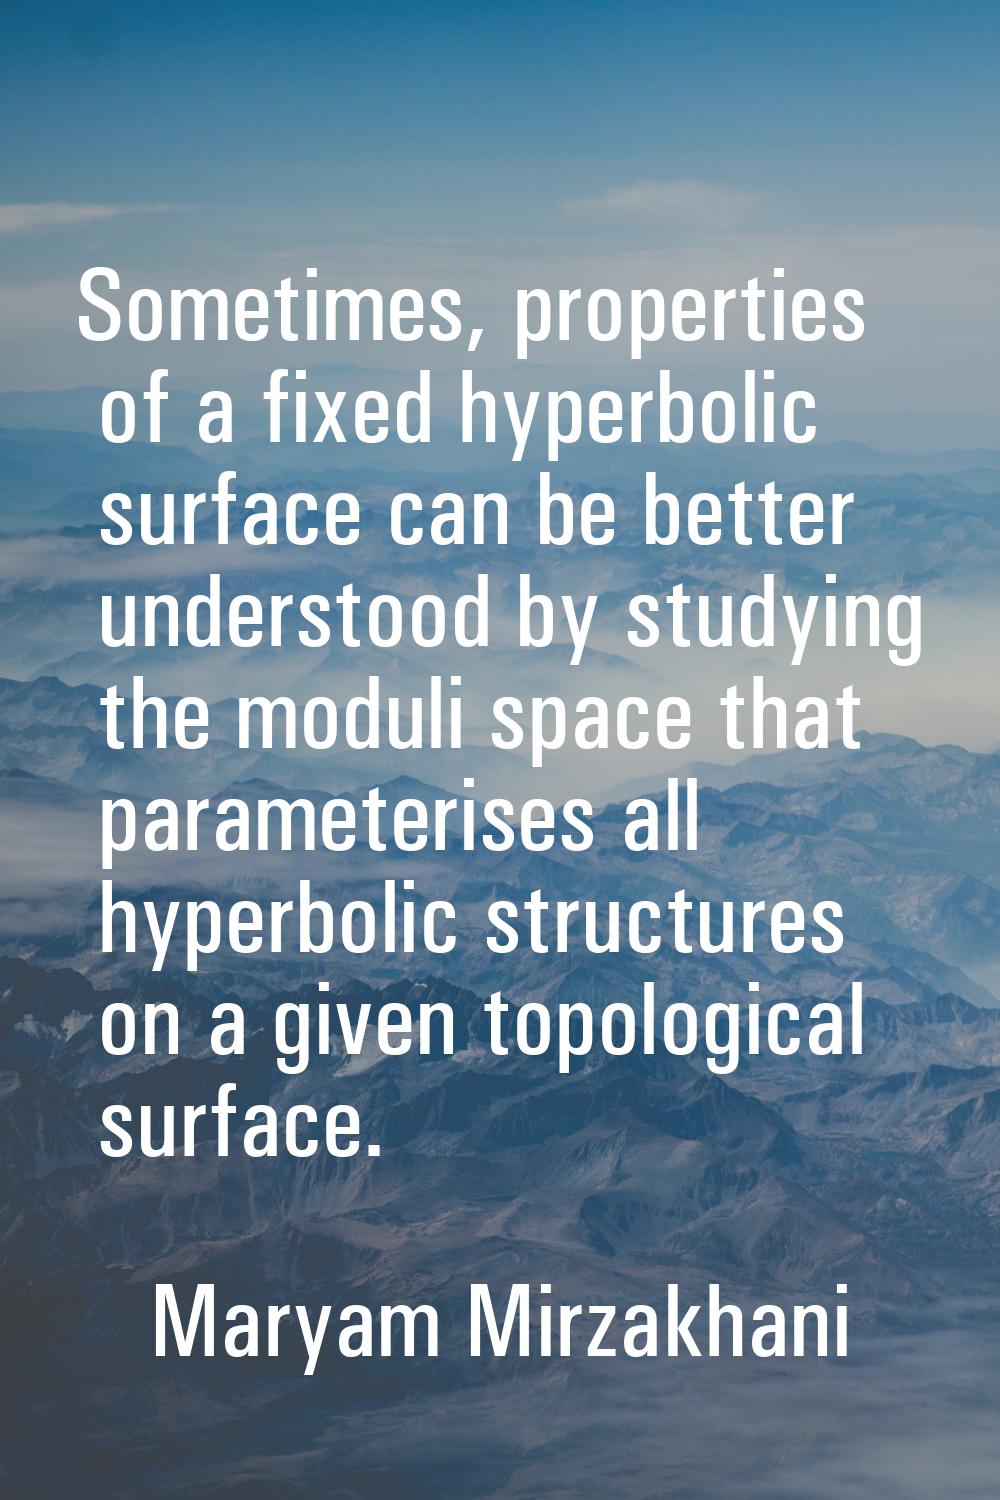 Sometimes, properties of a fixed hyperbolic surface can be better understood by studying the moduli